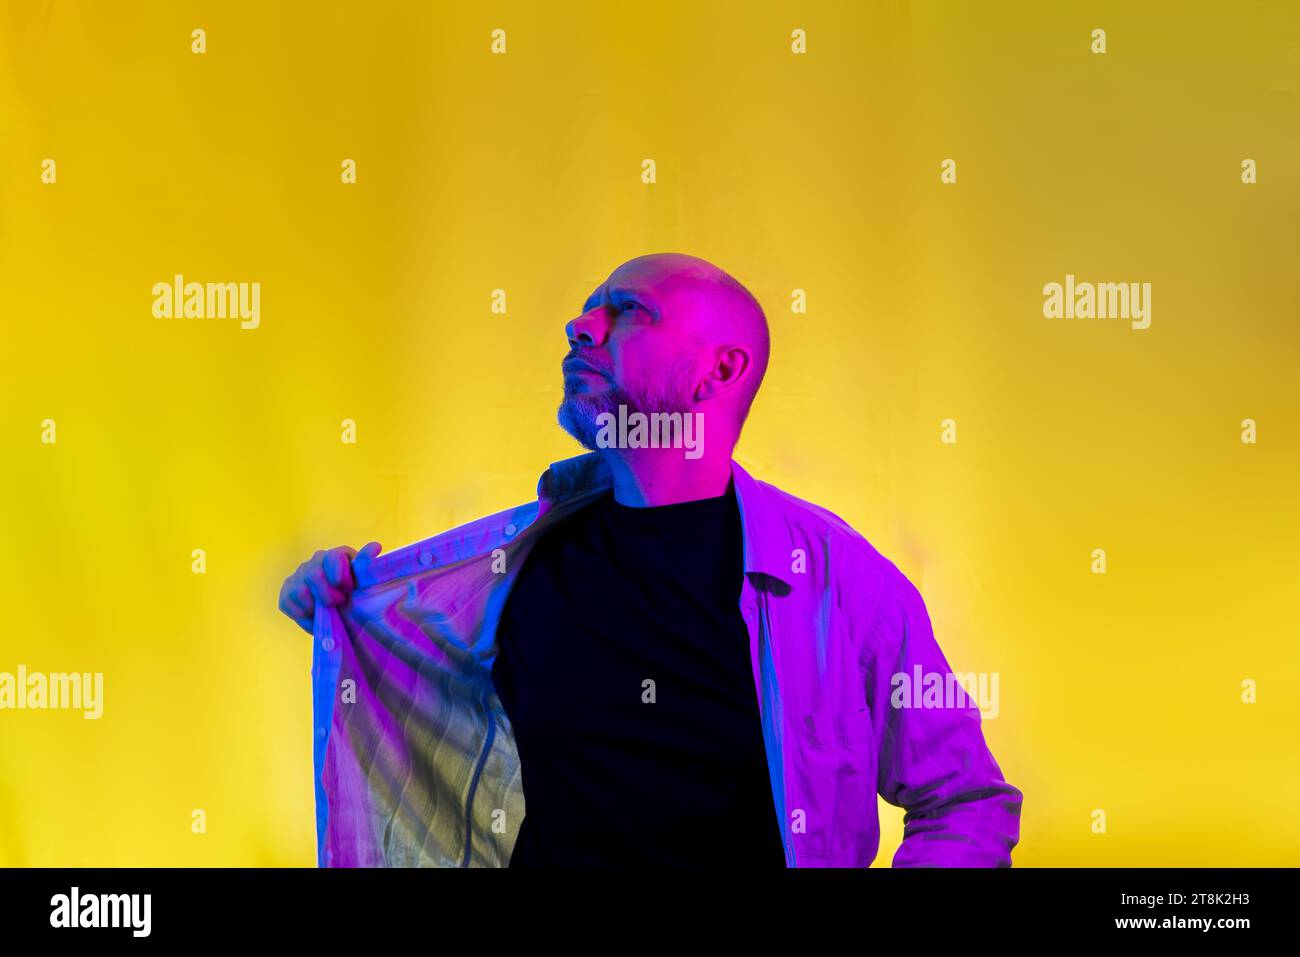 Bearded, bald man opening his shirt. Isolated on yellow background. Stock Photo